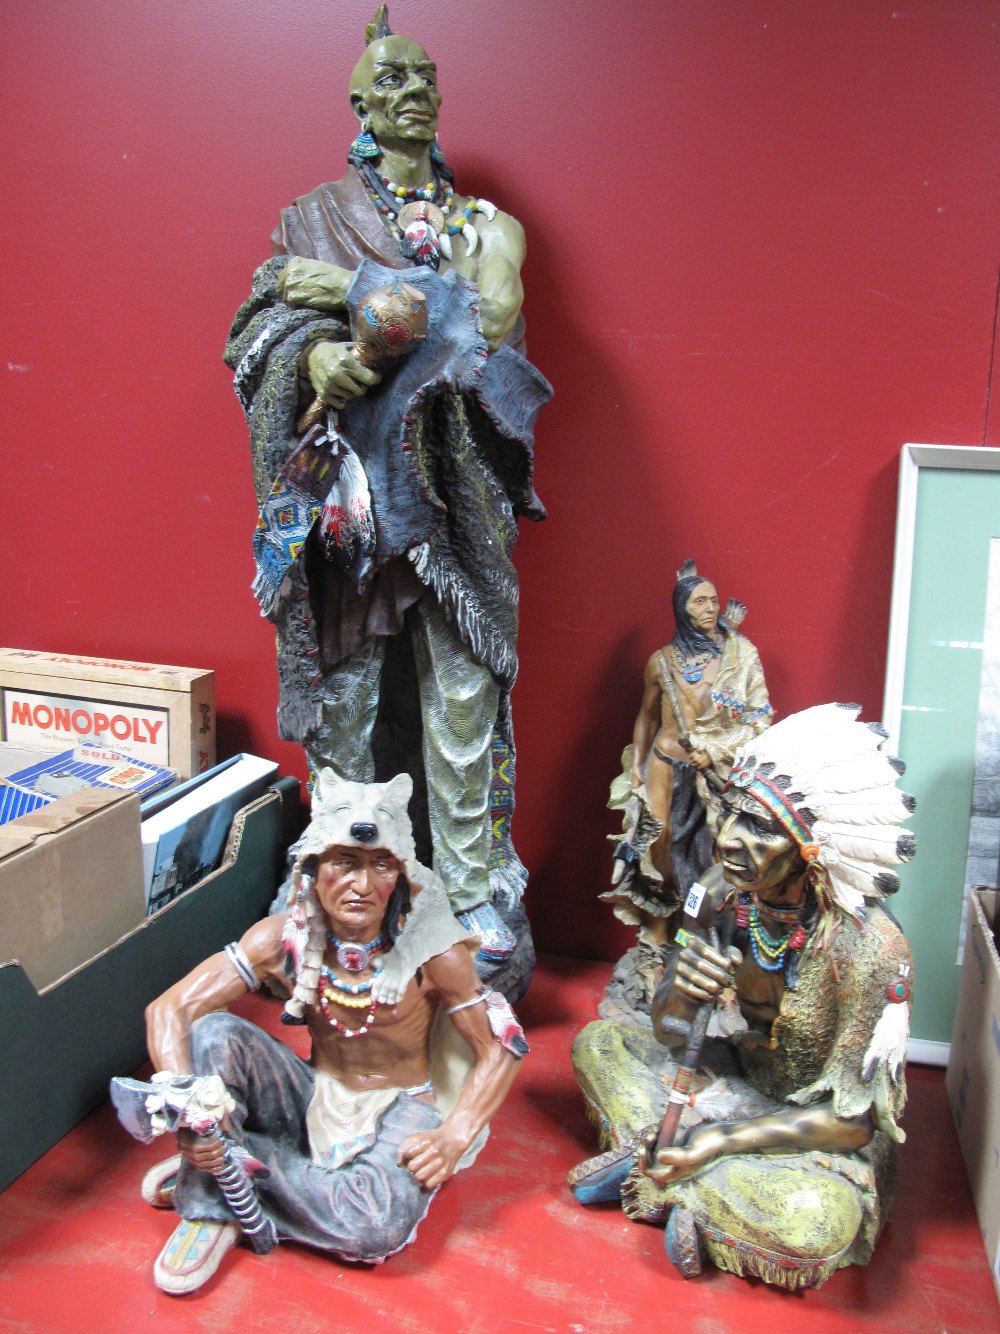 A Large Resin Figure of a Mohican, approximately 86cm high, standing and Red Indian Warriors.